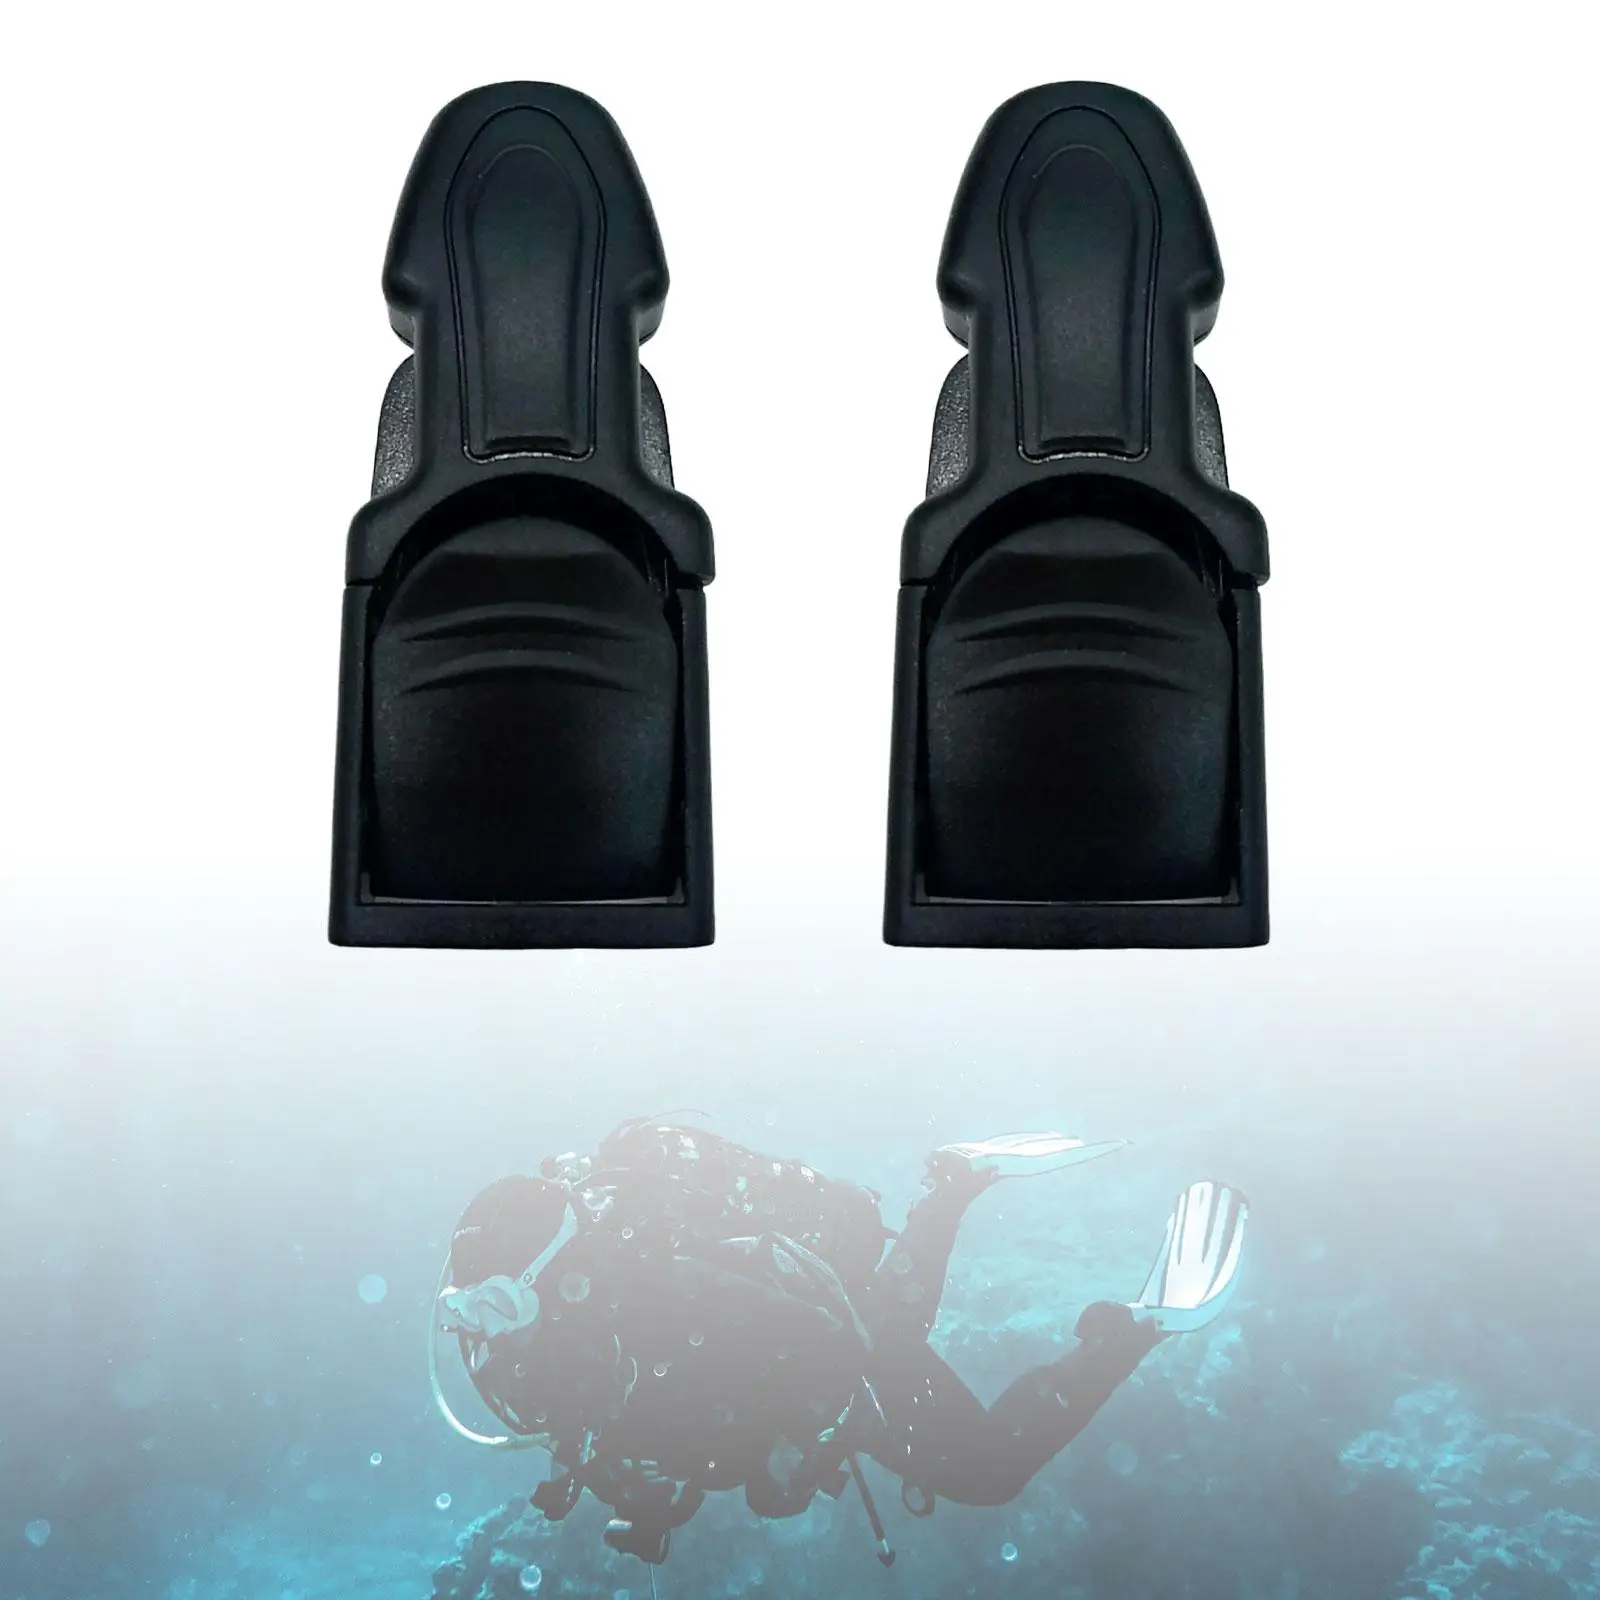 2Pcs Diving Fin Strap Buckles Adjustable Dive Fin Flippers Strap Quick Release Buckle for Scuba Diving Freediving Snorkeling